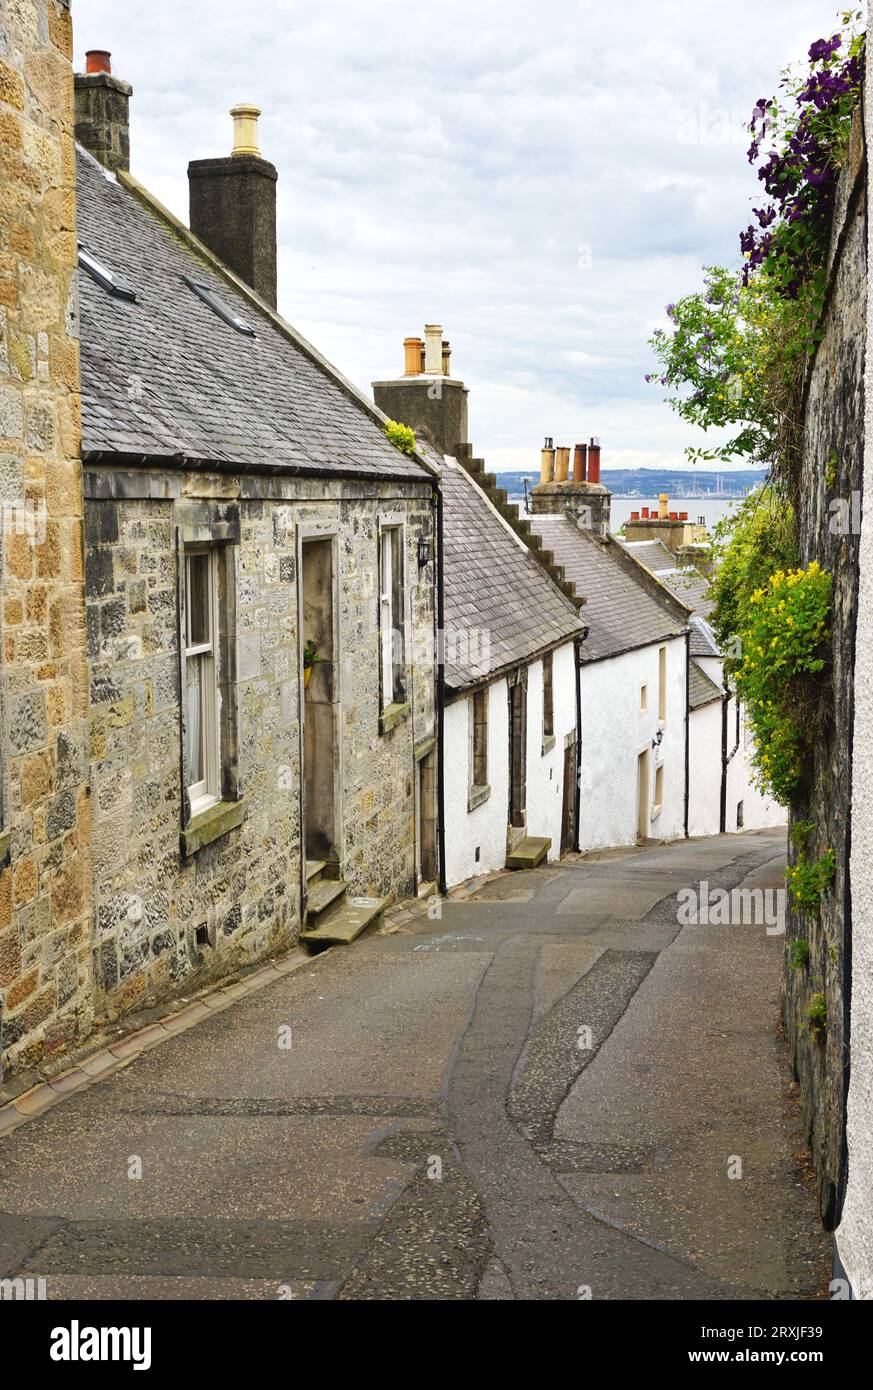 Quaint stone cottages line a narrow cobblestone street in the village of Culross, Scotland. Just visible in the distance is the Firth of Forth. Stock Photo